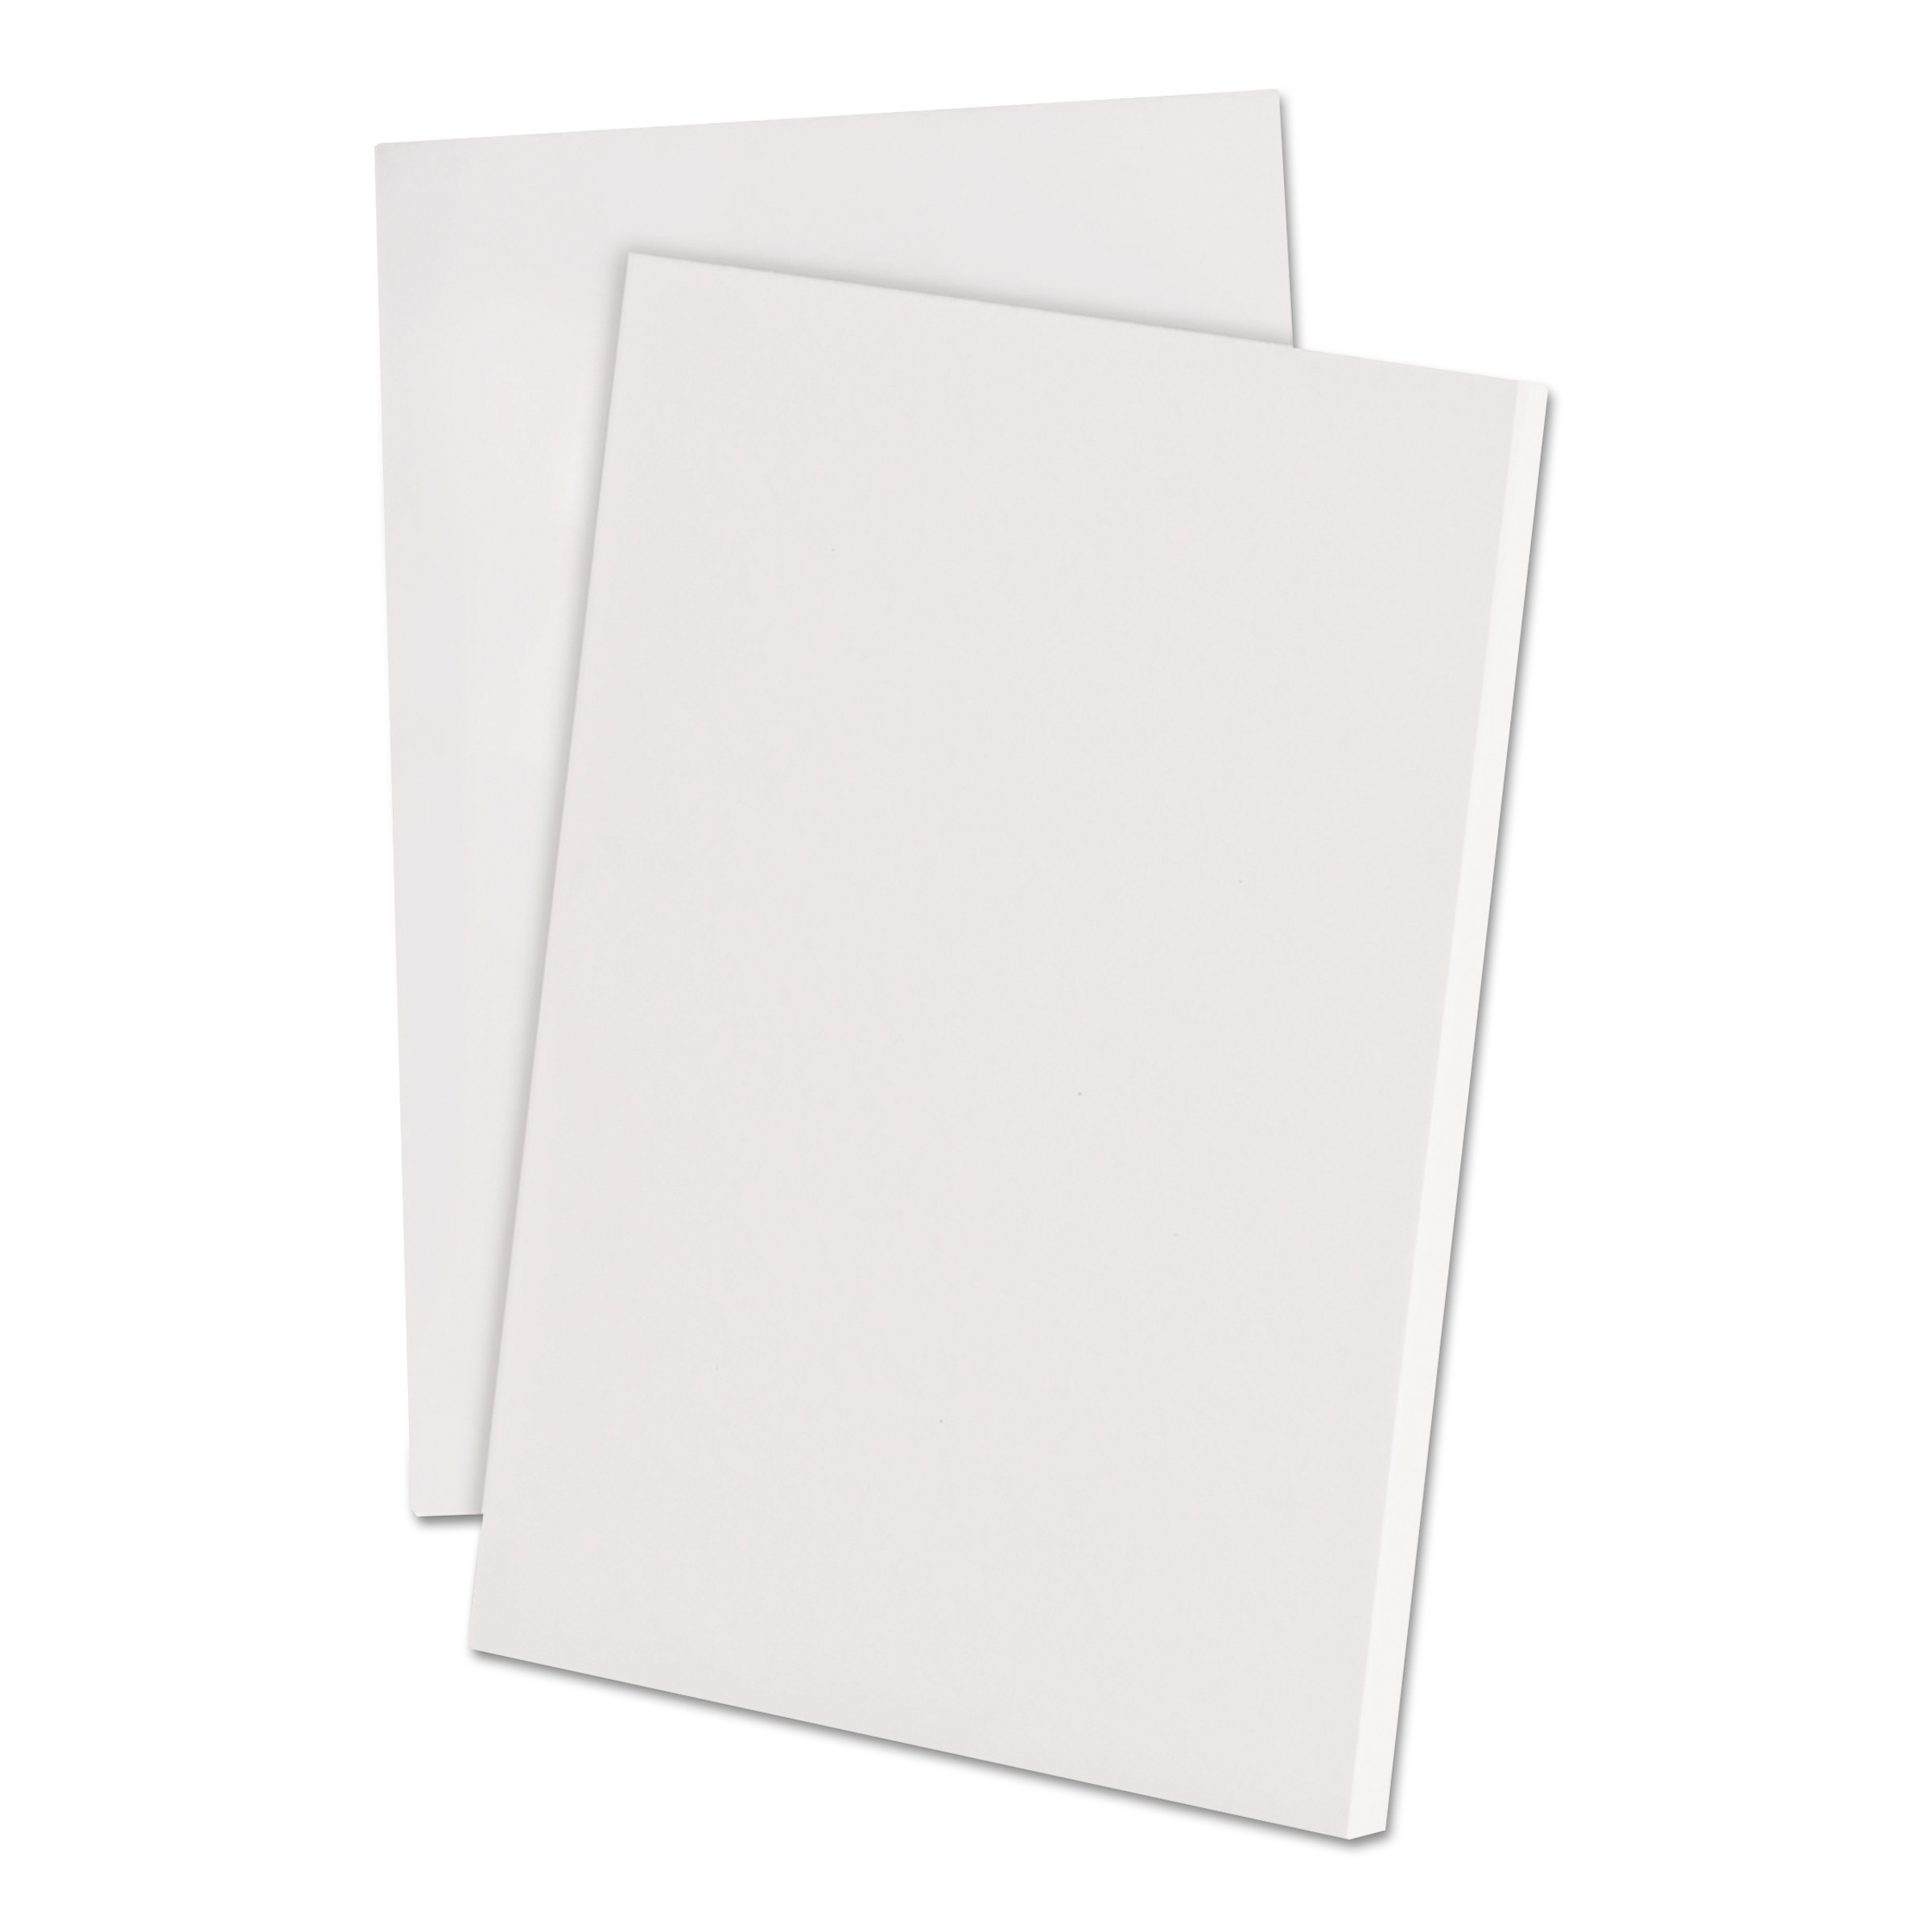  Ampad 21-731 Scratch Pads, Unruled, 4 x 6, White, 100 Sheets, 12/Pack (TOP21731) 